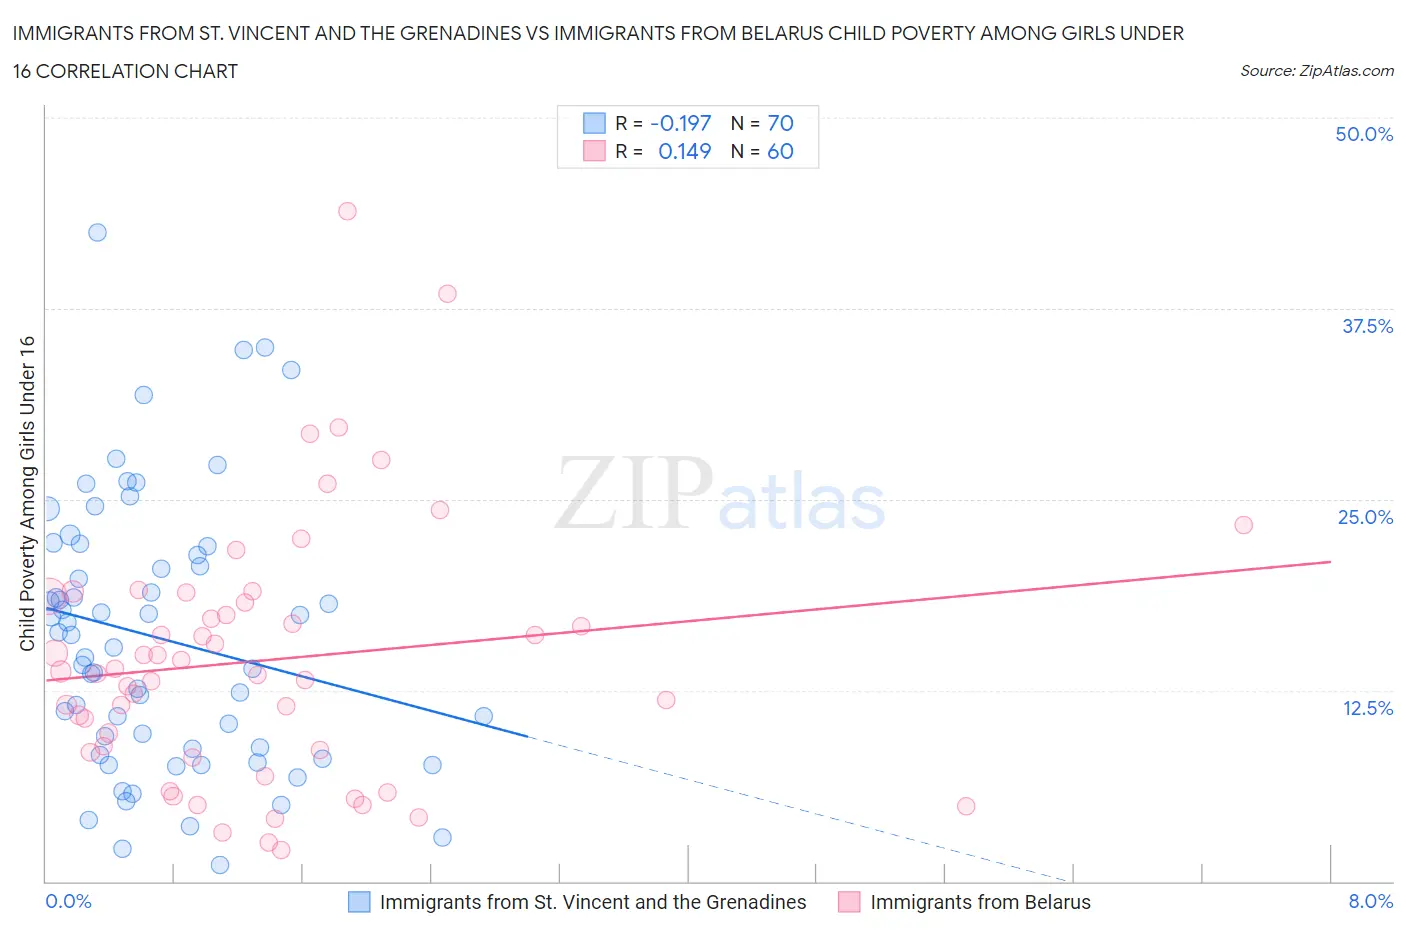 Immigrants from St. Vincent and the Grenadines vs Immigrants from Belarus Child Poverty Among Girls Under 16